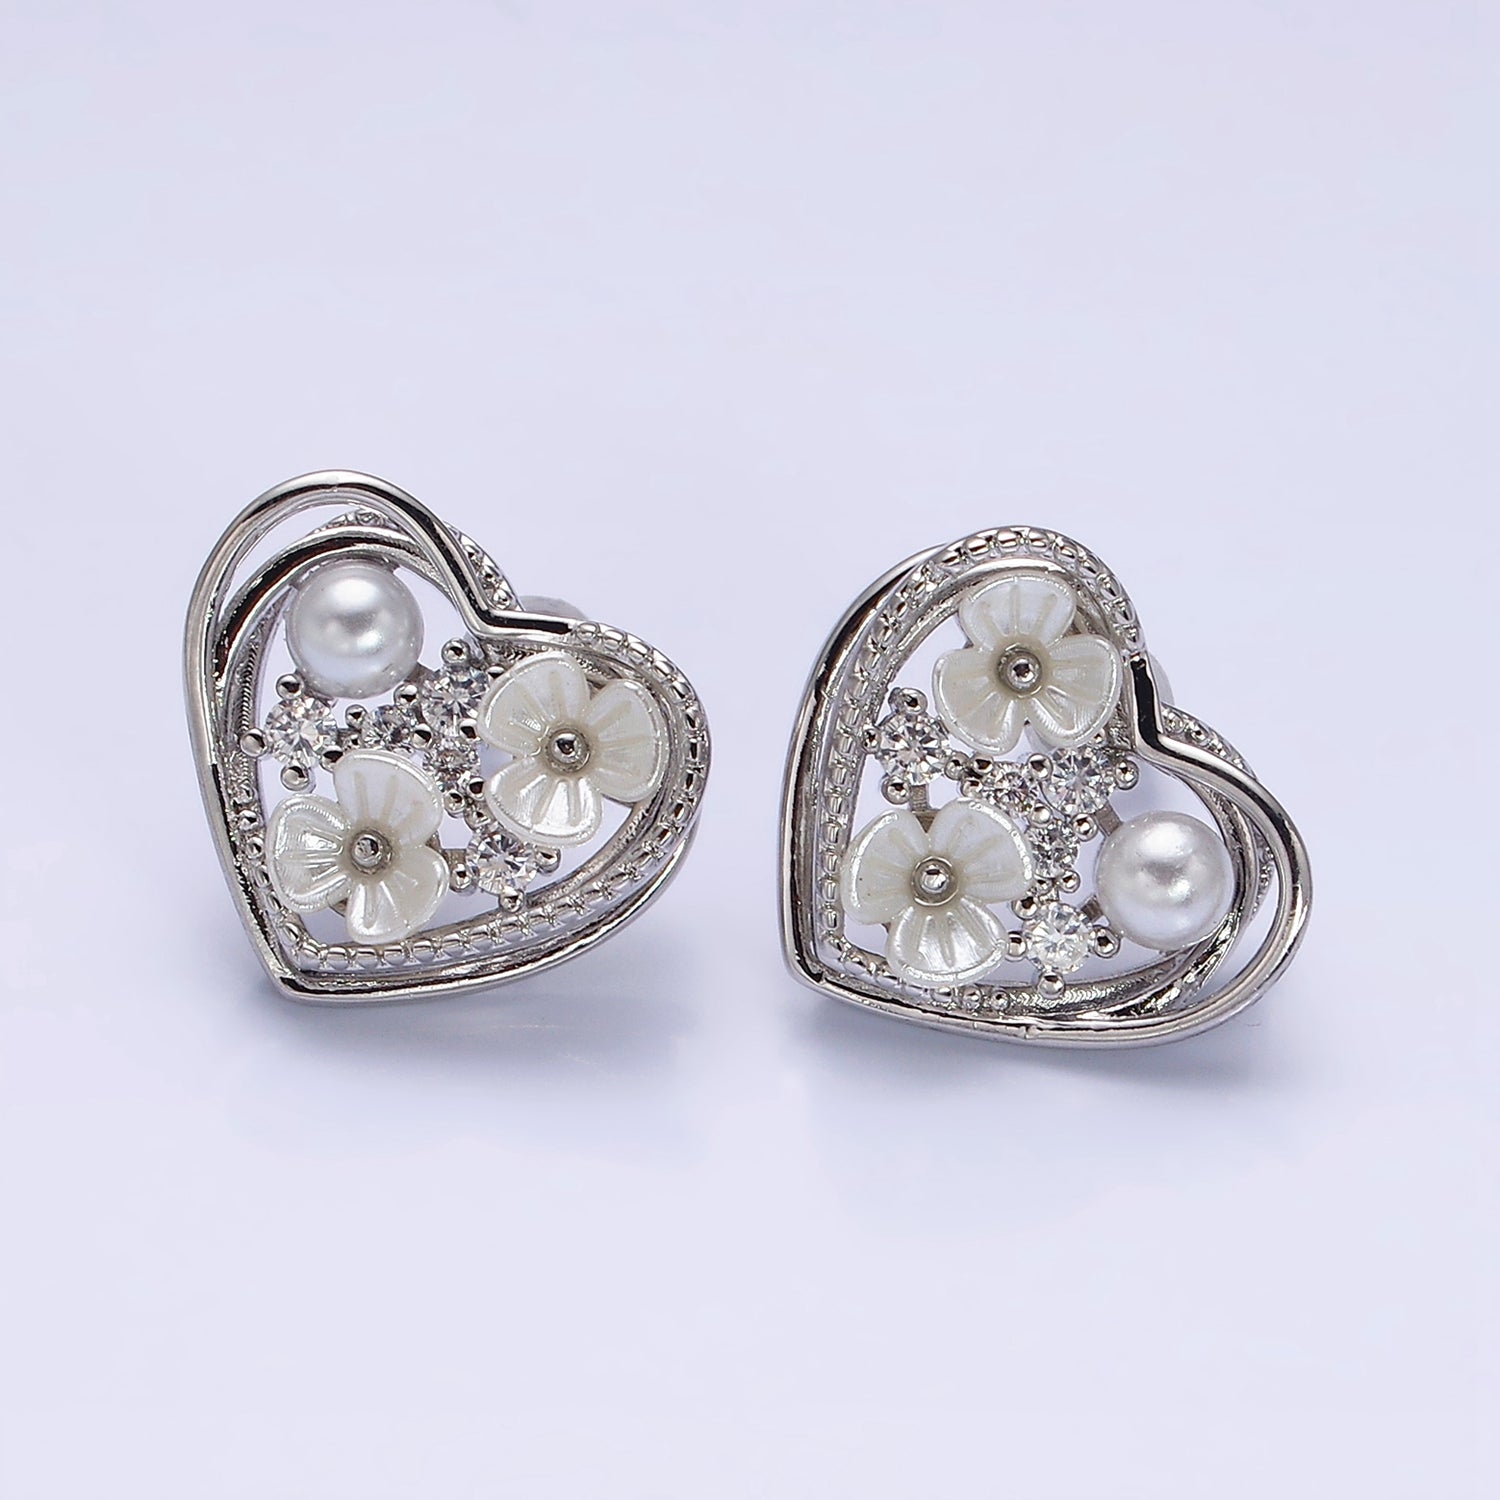 Gold, Silver Double Flower Pearl CZ Framed Hearts Stud Earrings | AD1052 AD1053